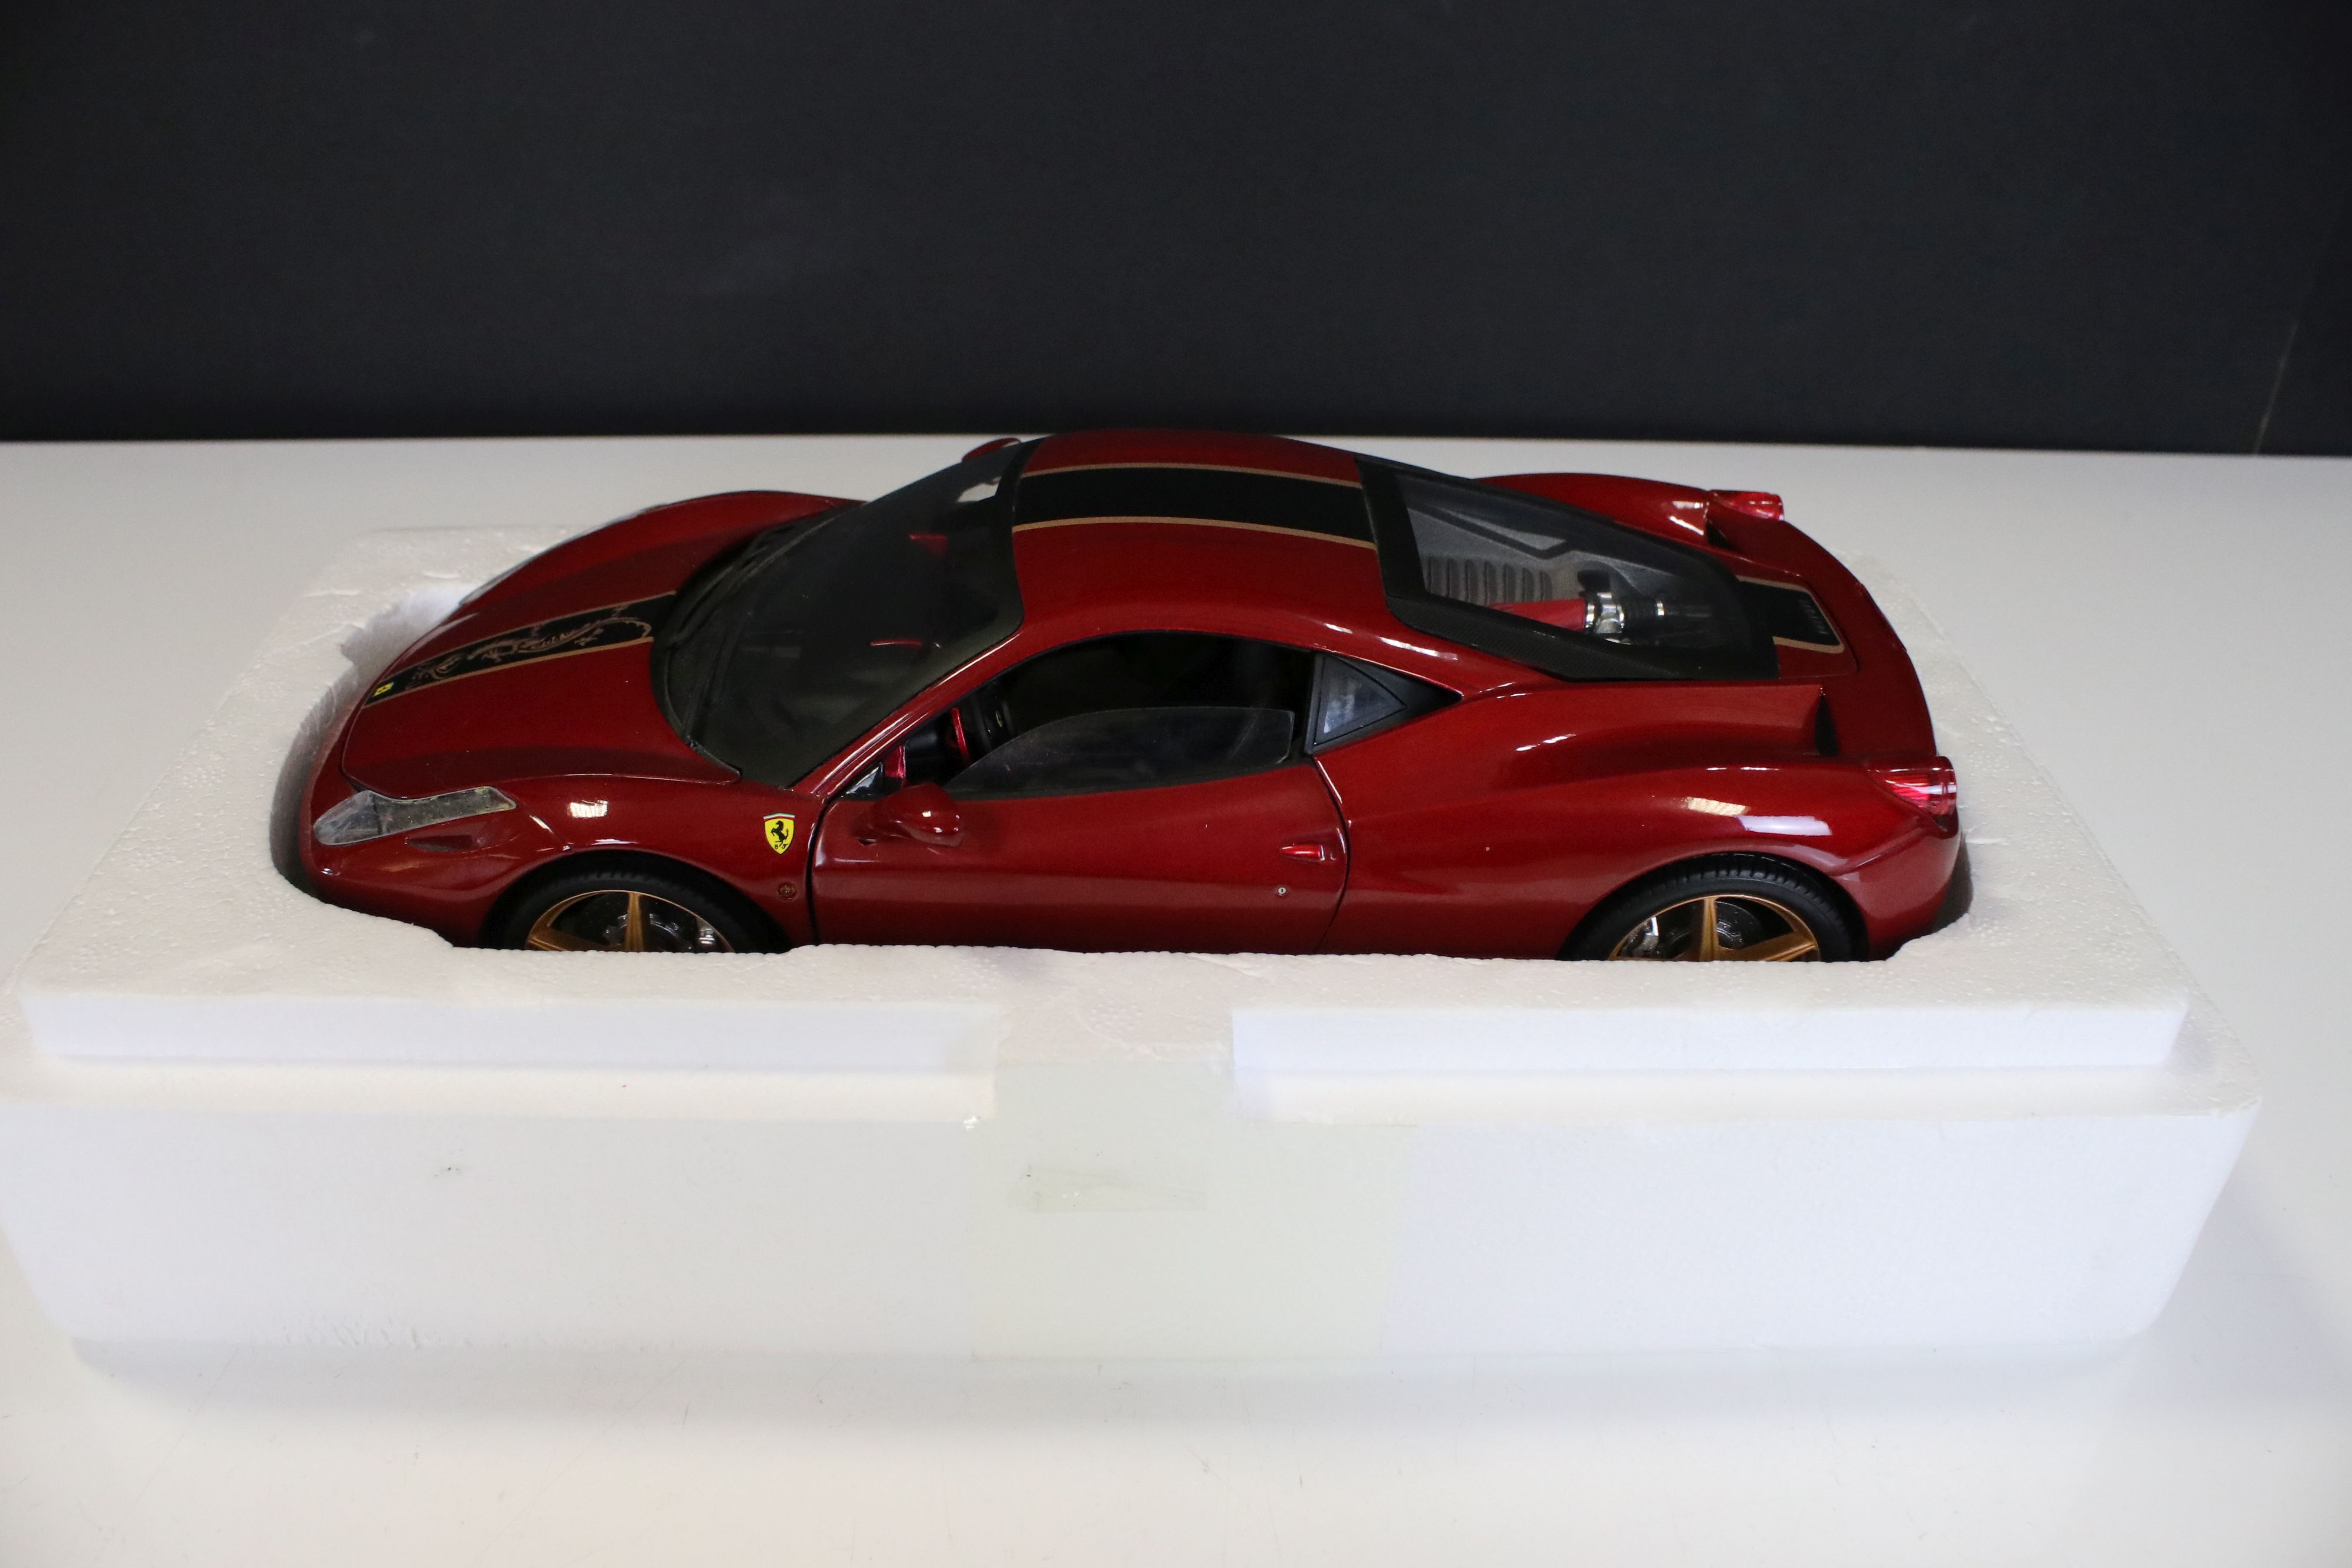 Two boxed 1/18 Hot Wheels Ferrari diecast models to include Elite BCK12 458 Italia and X5524 FF, - Image 7 of 9